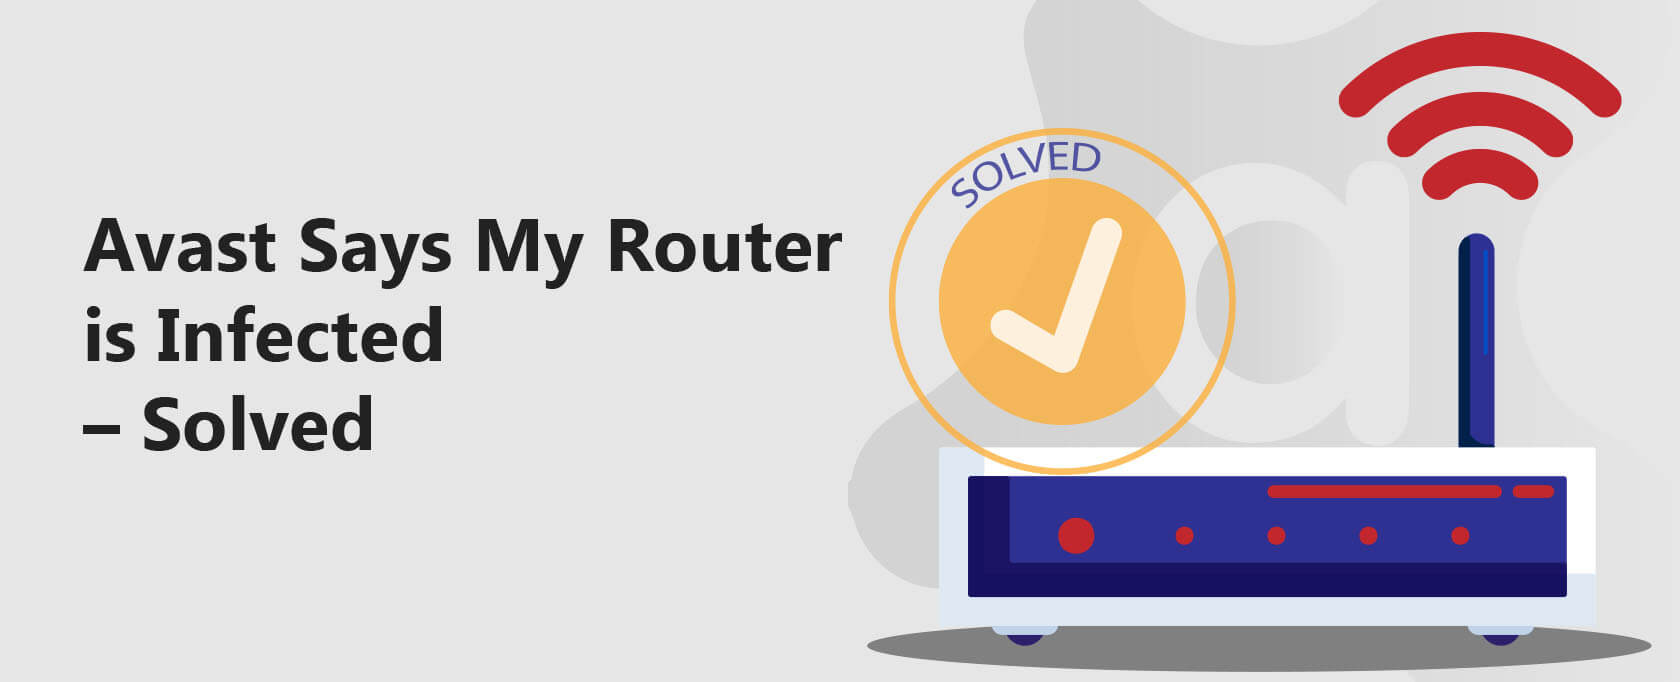 expedition Kent artery Avast Says My Router is Infected - Solved - 2022 Guide